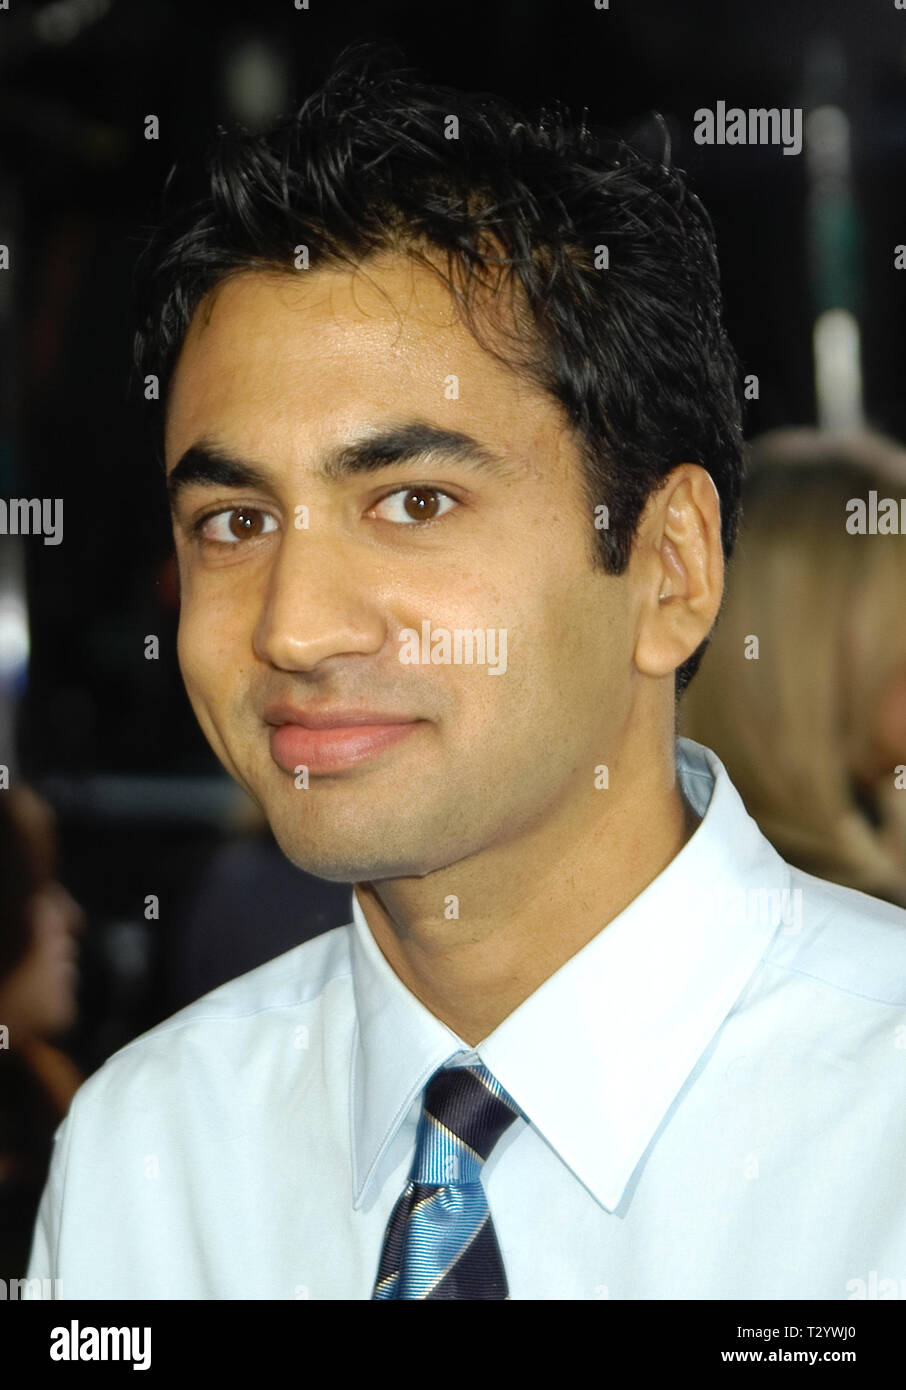 Kal Penn at the  Premiere of Warner Bros. 'Malibu's Most Wanted', held at Grauman's Chinese Theater in Hollywood, CA. The event took place on Thursday, April 10, 2003.  Photo by: SBM / PictureLux  File Reference # 33790 803SBMPLX Stock Photo